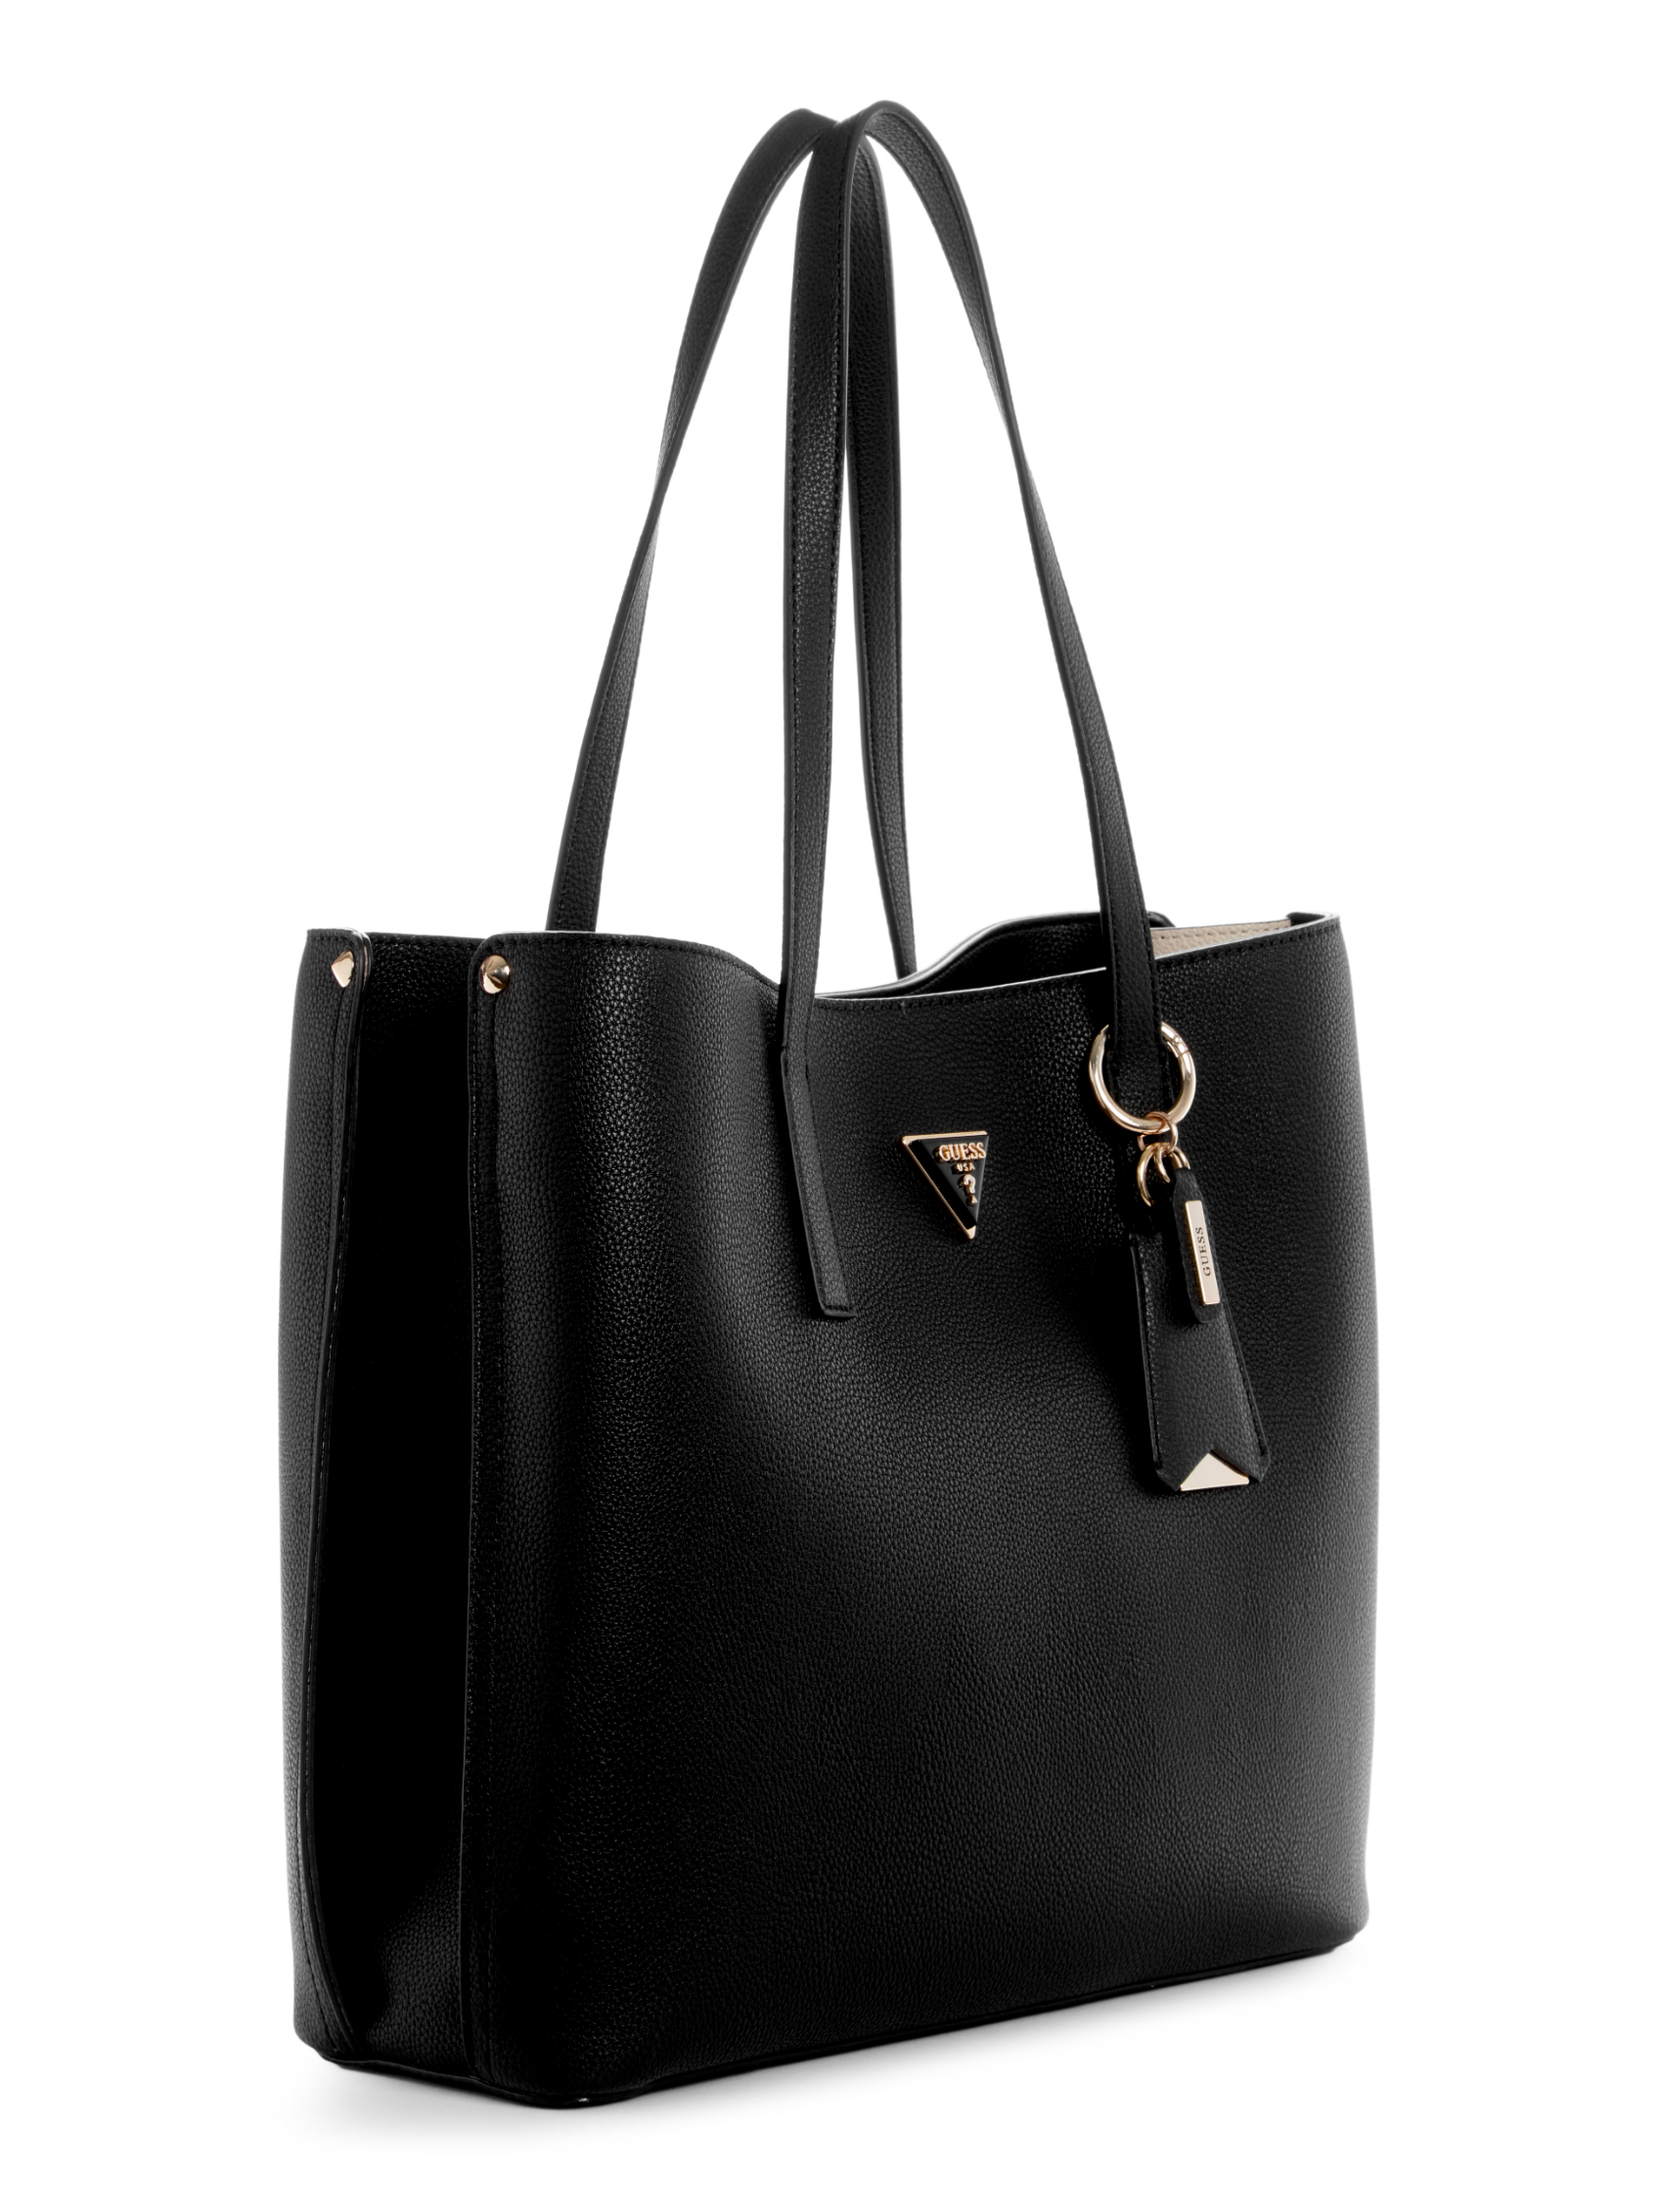 MERIDIAN GIRLFRIEND TOTE | Guess Philippines